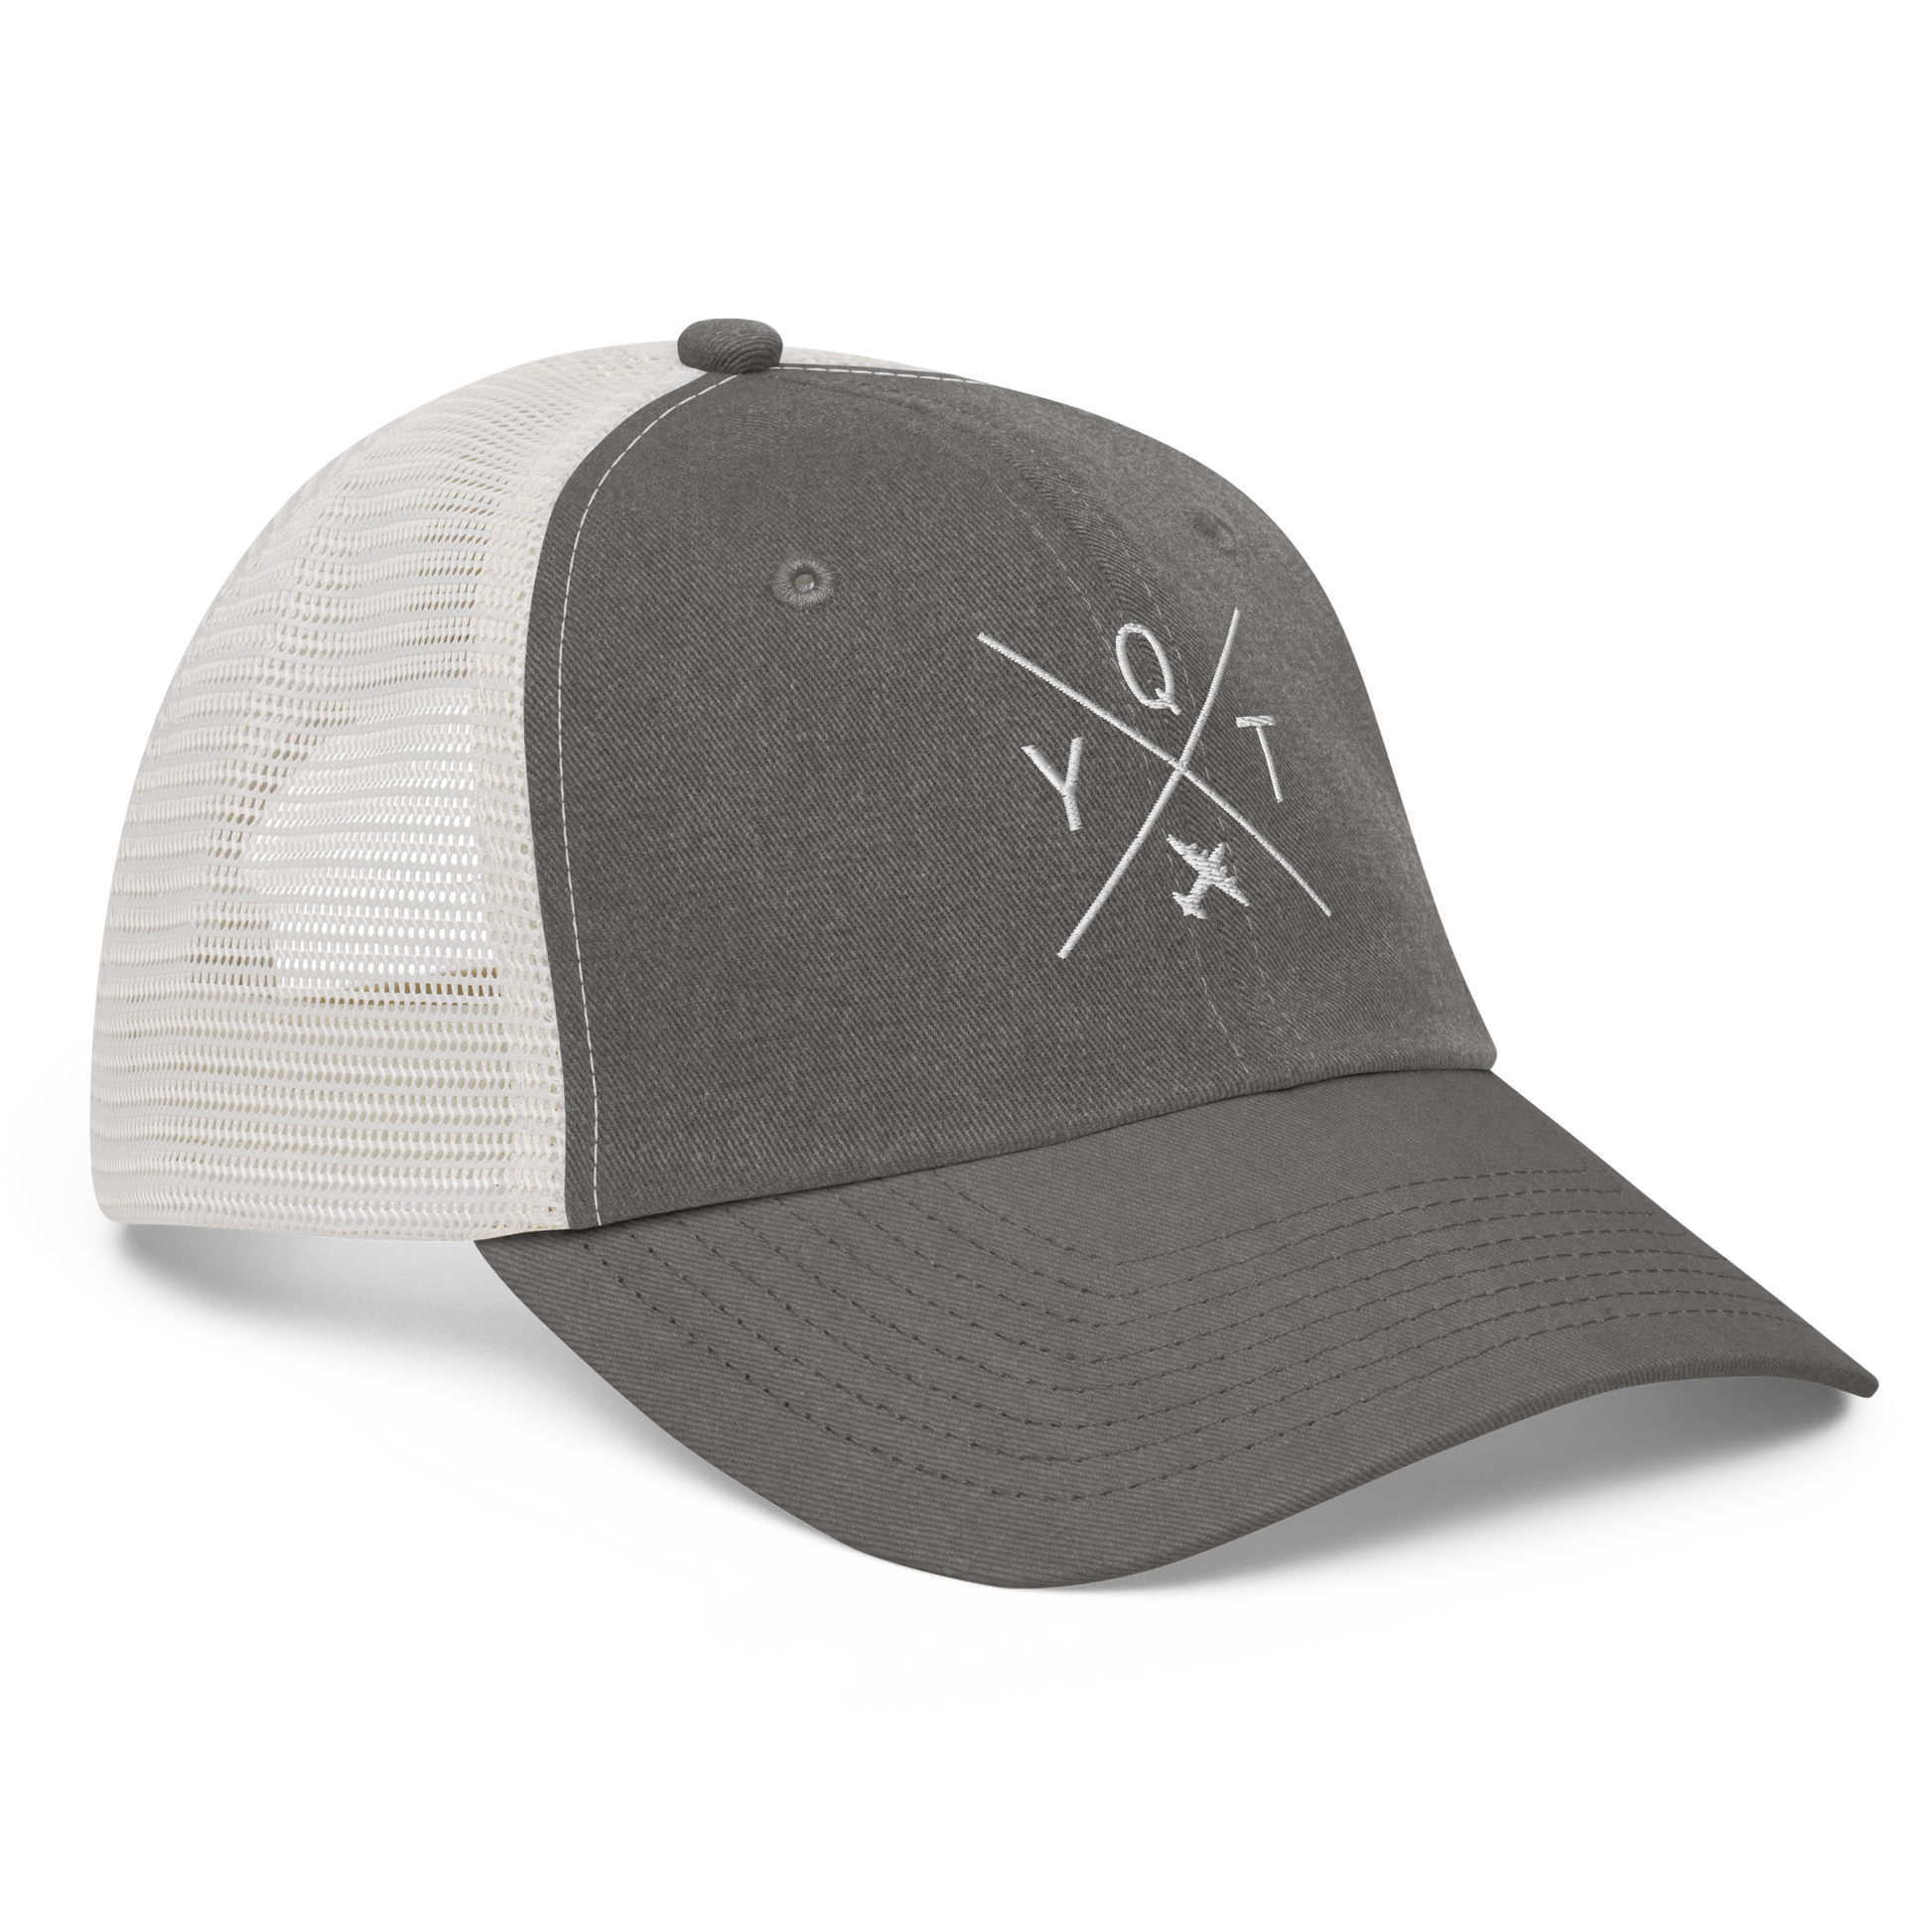 YHM Designs - YQT Thunder Bay Pigment-Dyed Trucker Cap - Crossed-X Design with Airport Code and Vintage Propliner - White Embroidery - Image 10